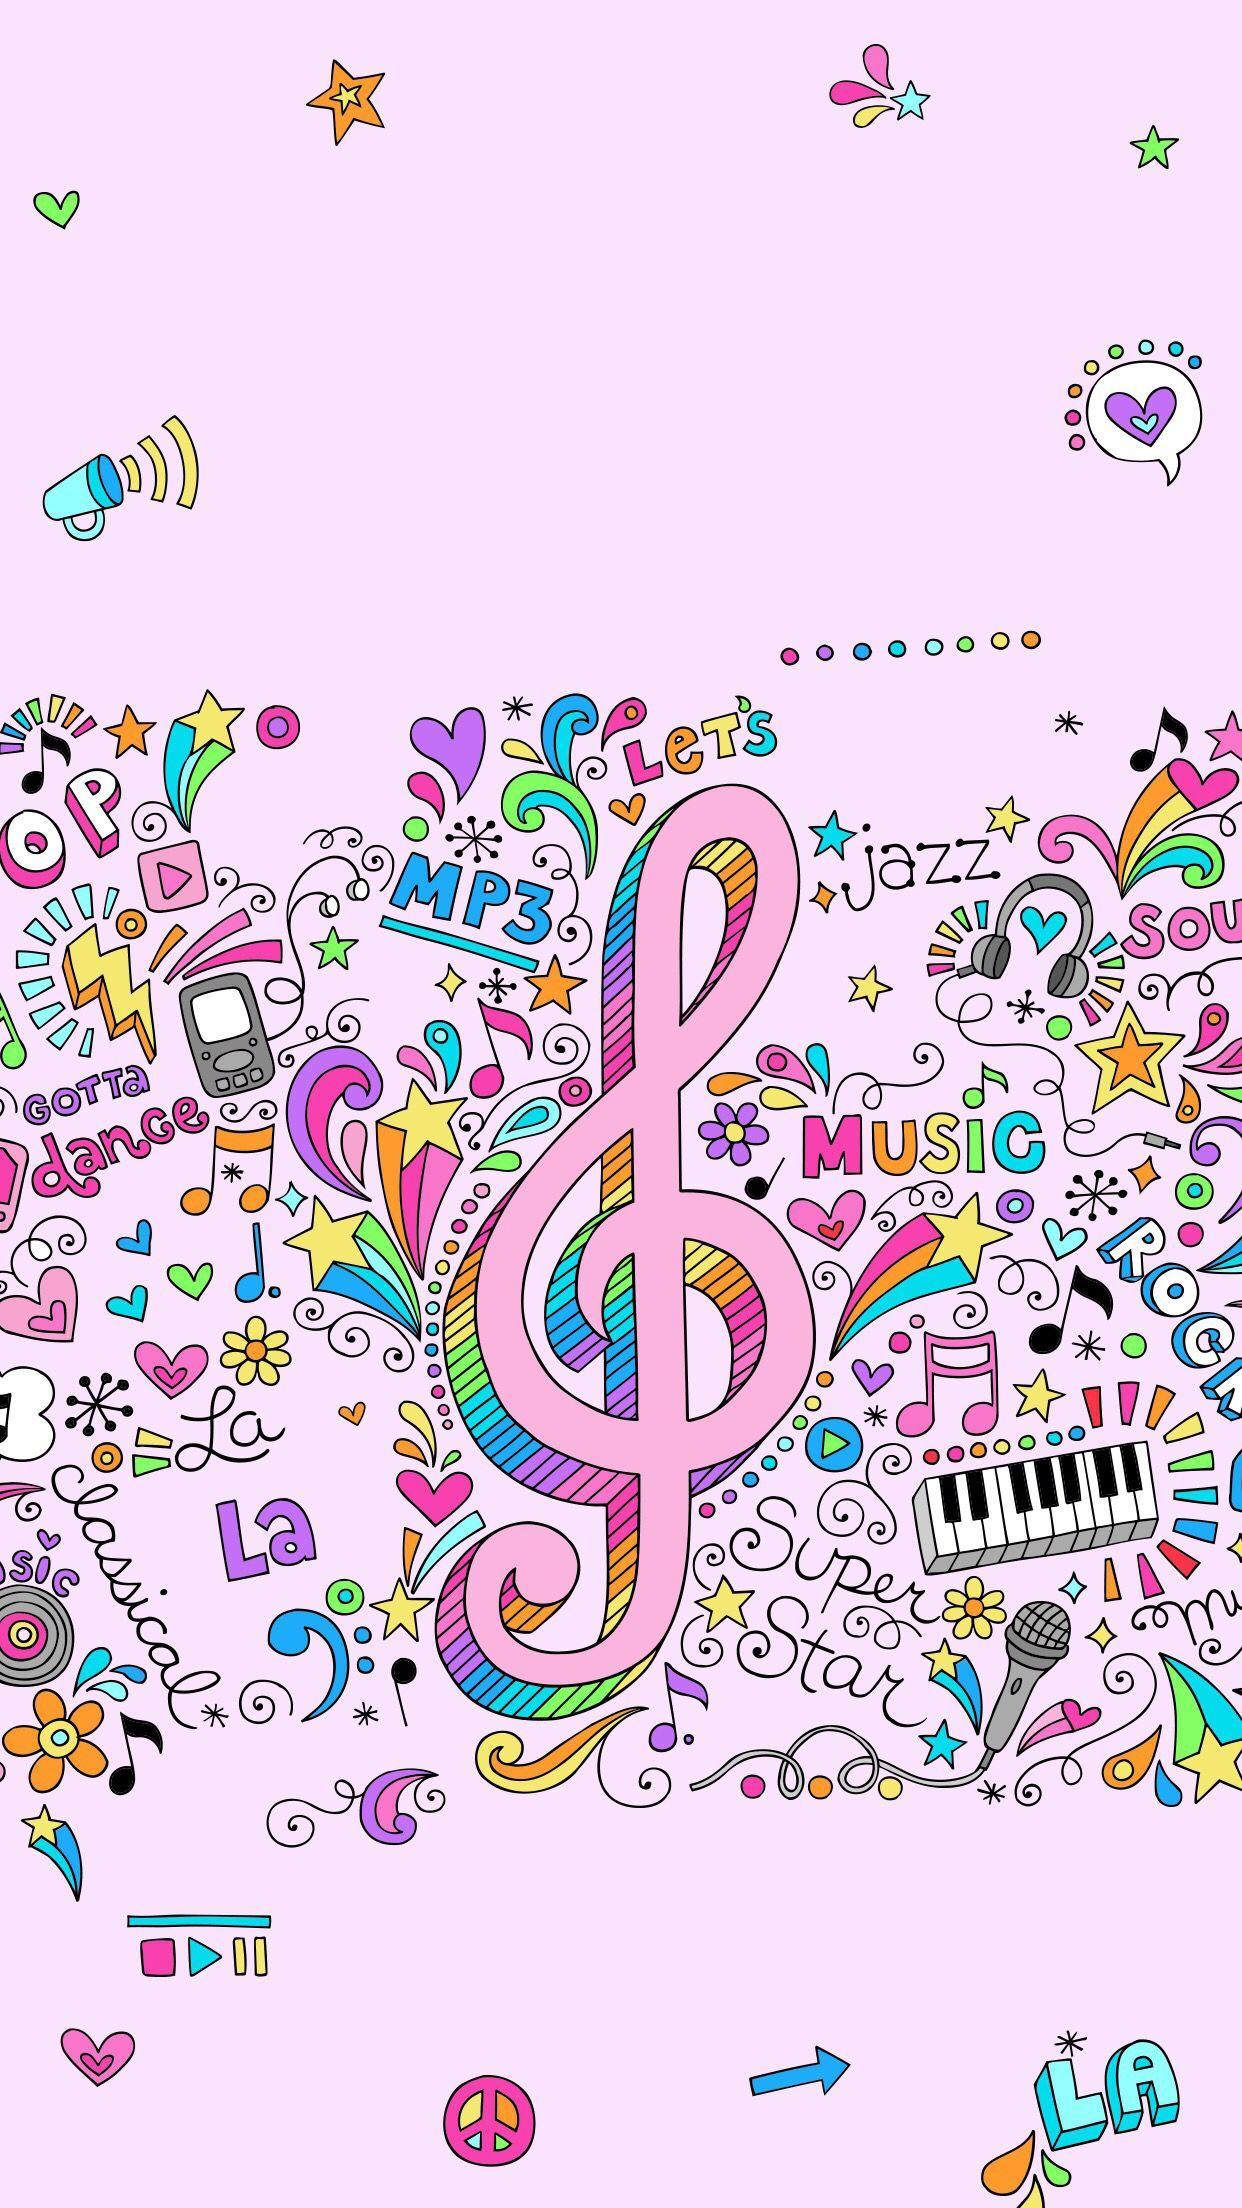 Cute I Love Music Wallpapers